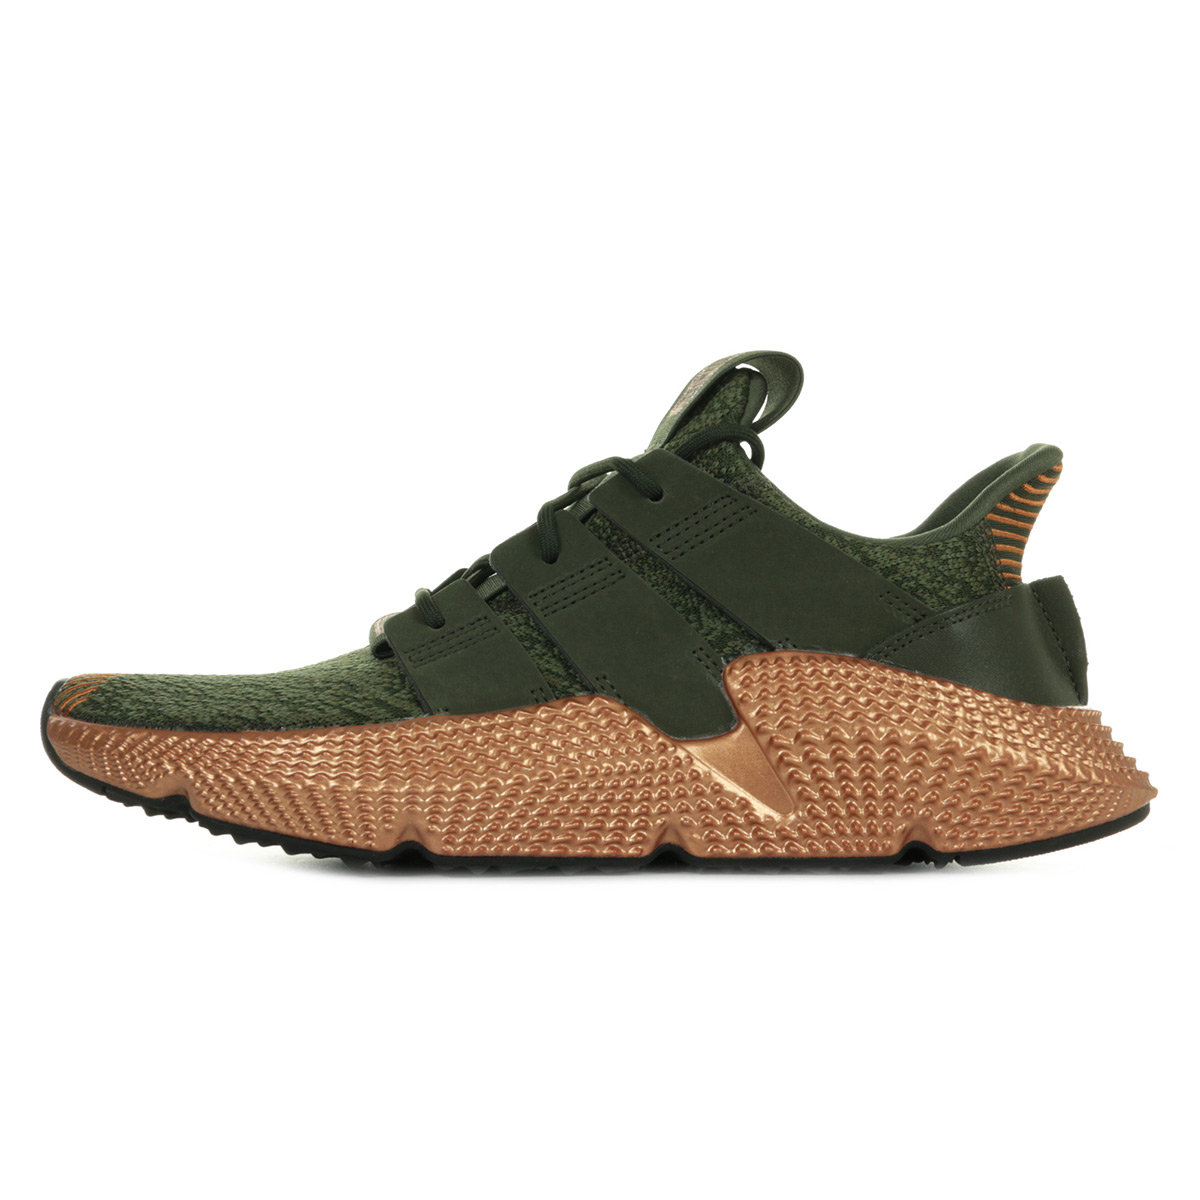 adidas chaussure femmes prophere